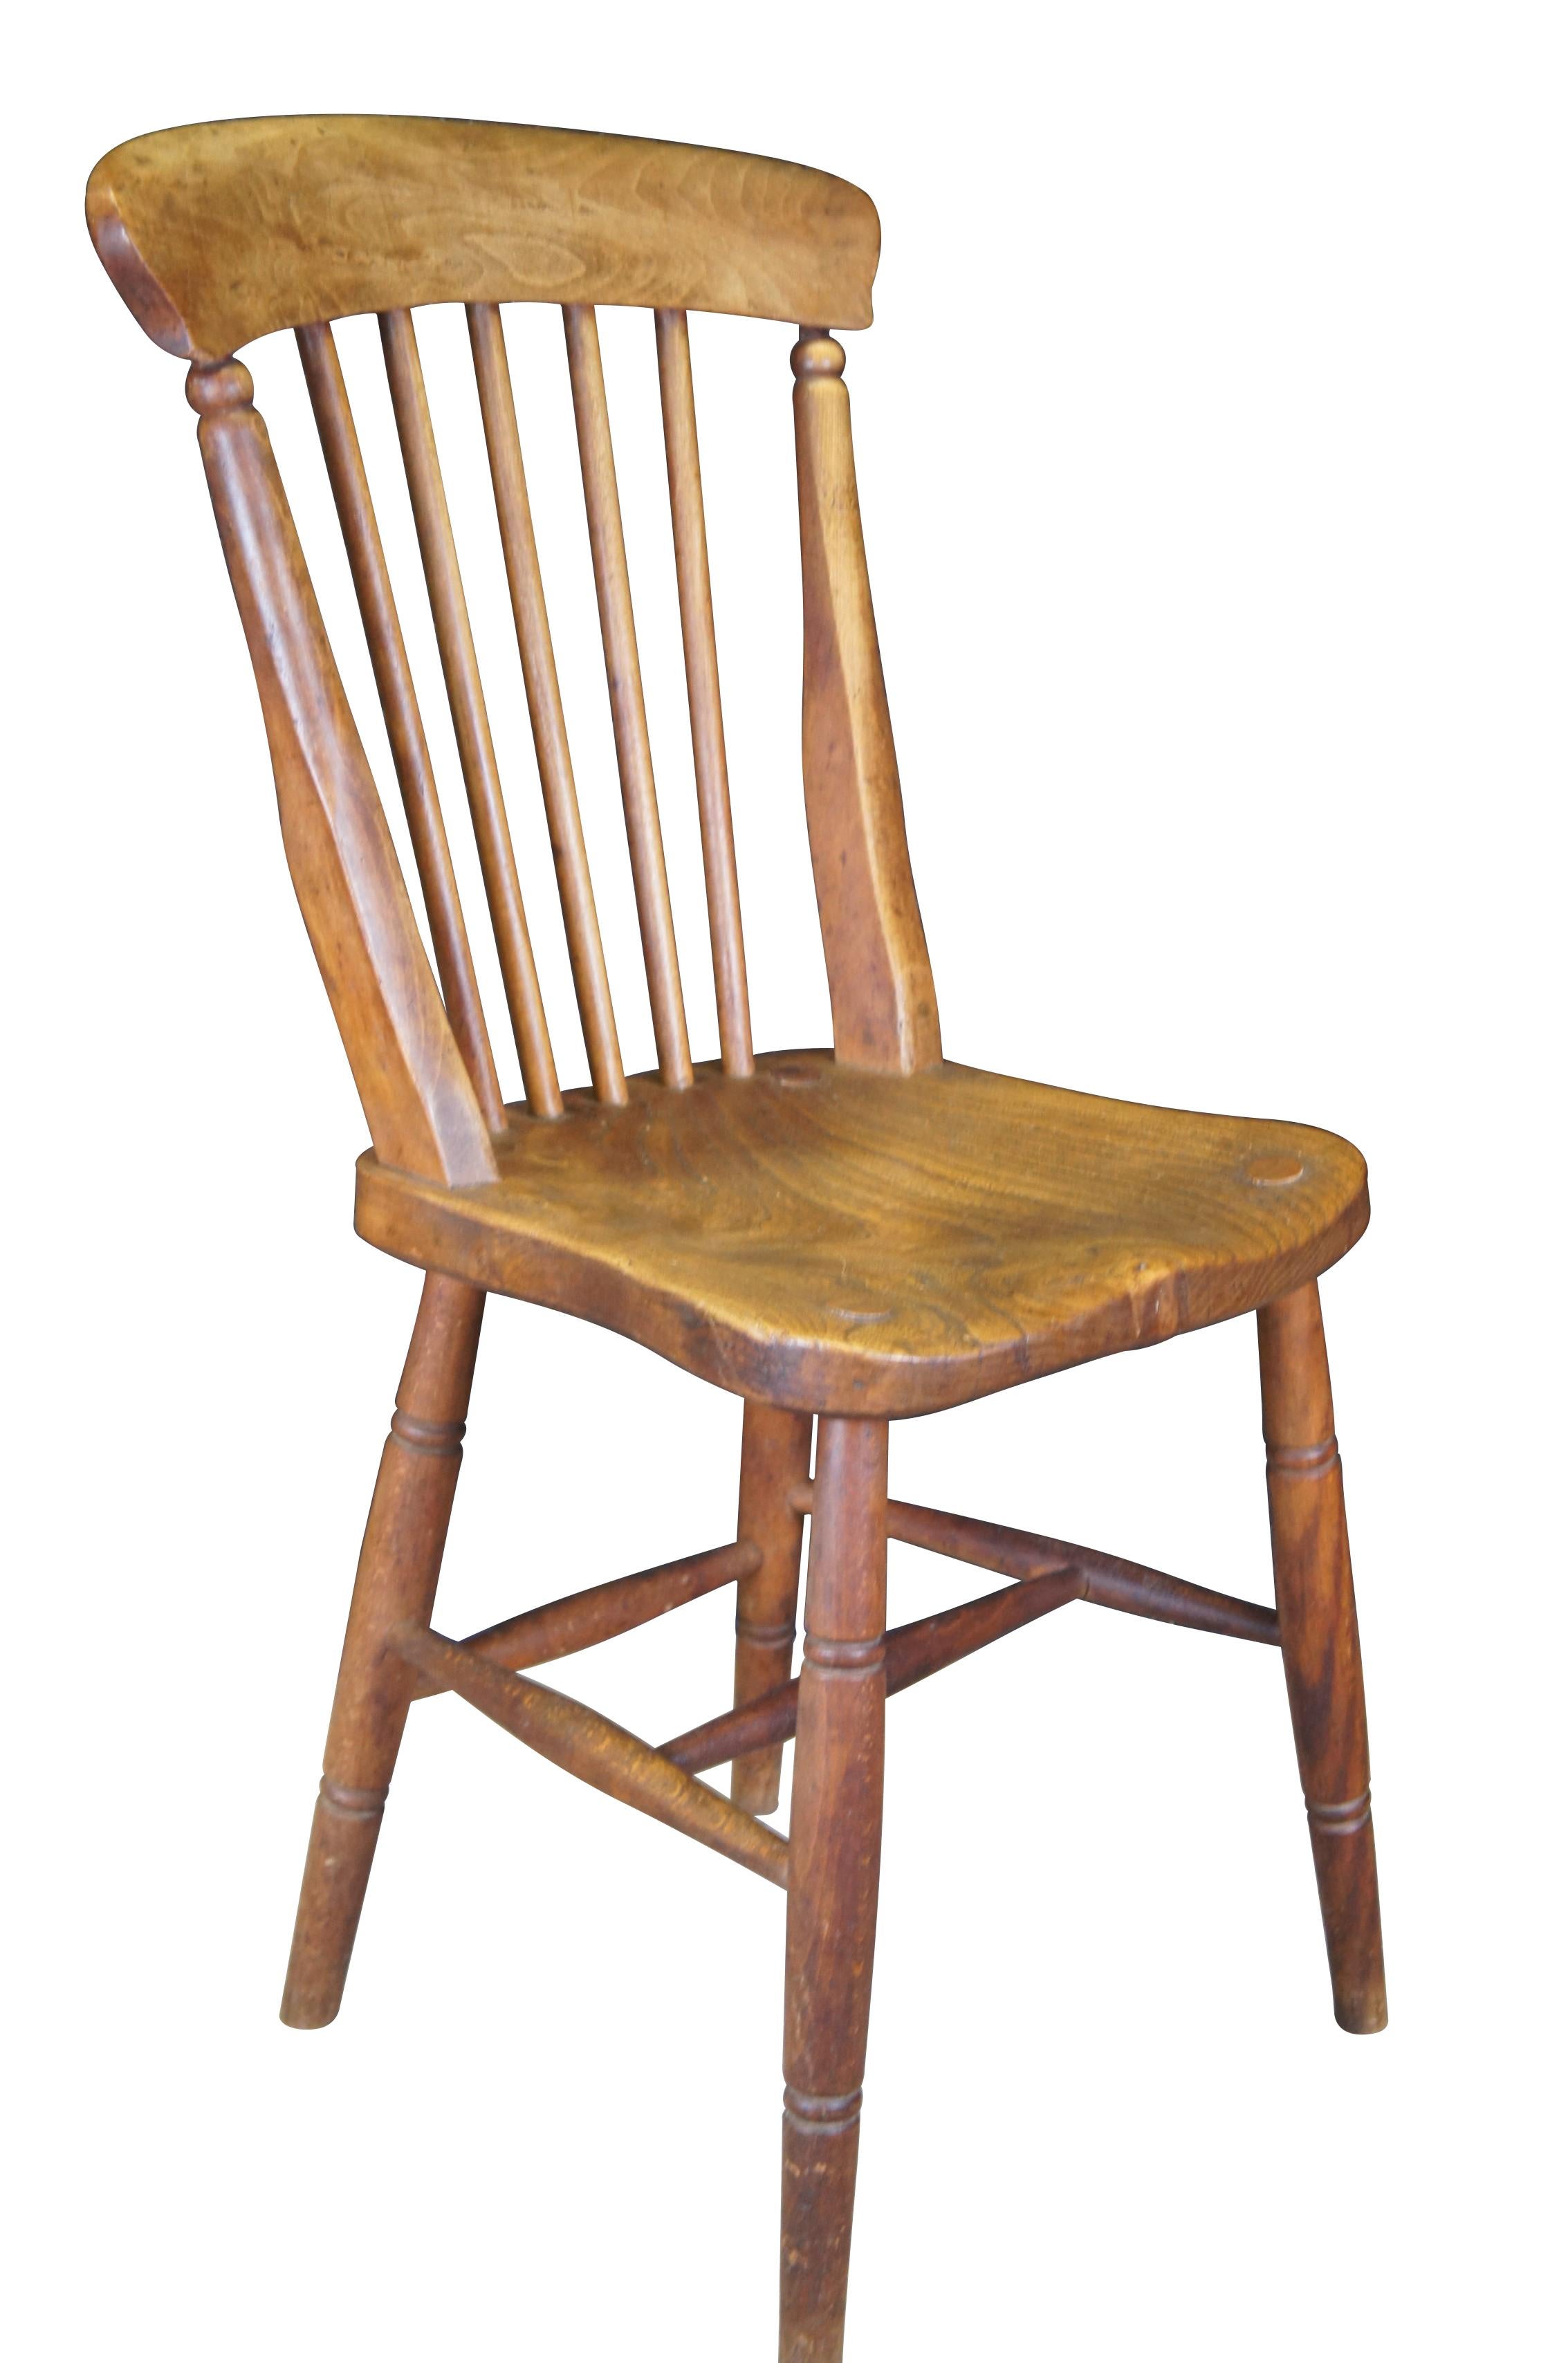 Victorian 6 Antique English Glenister Wycomb Elm Windsor Country Farmhouse Dining Chairs For Sale